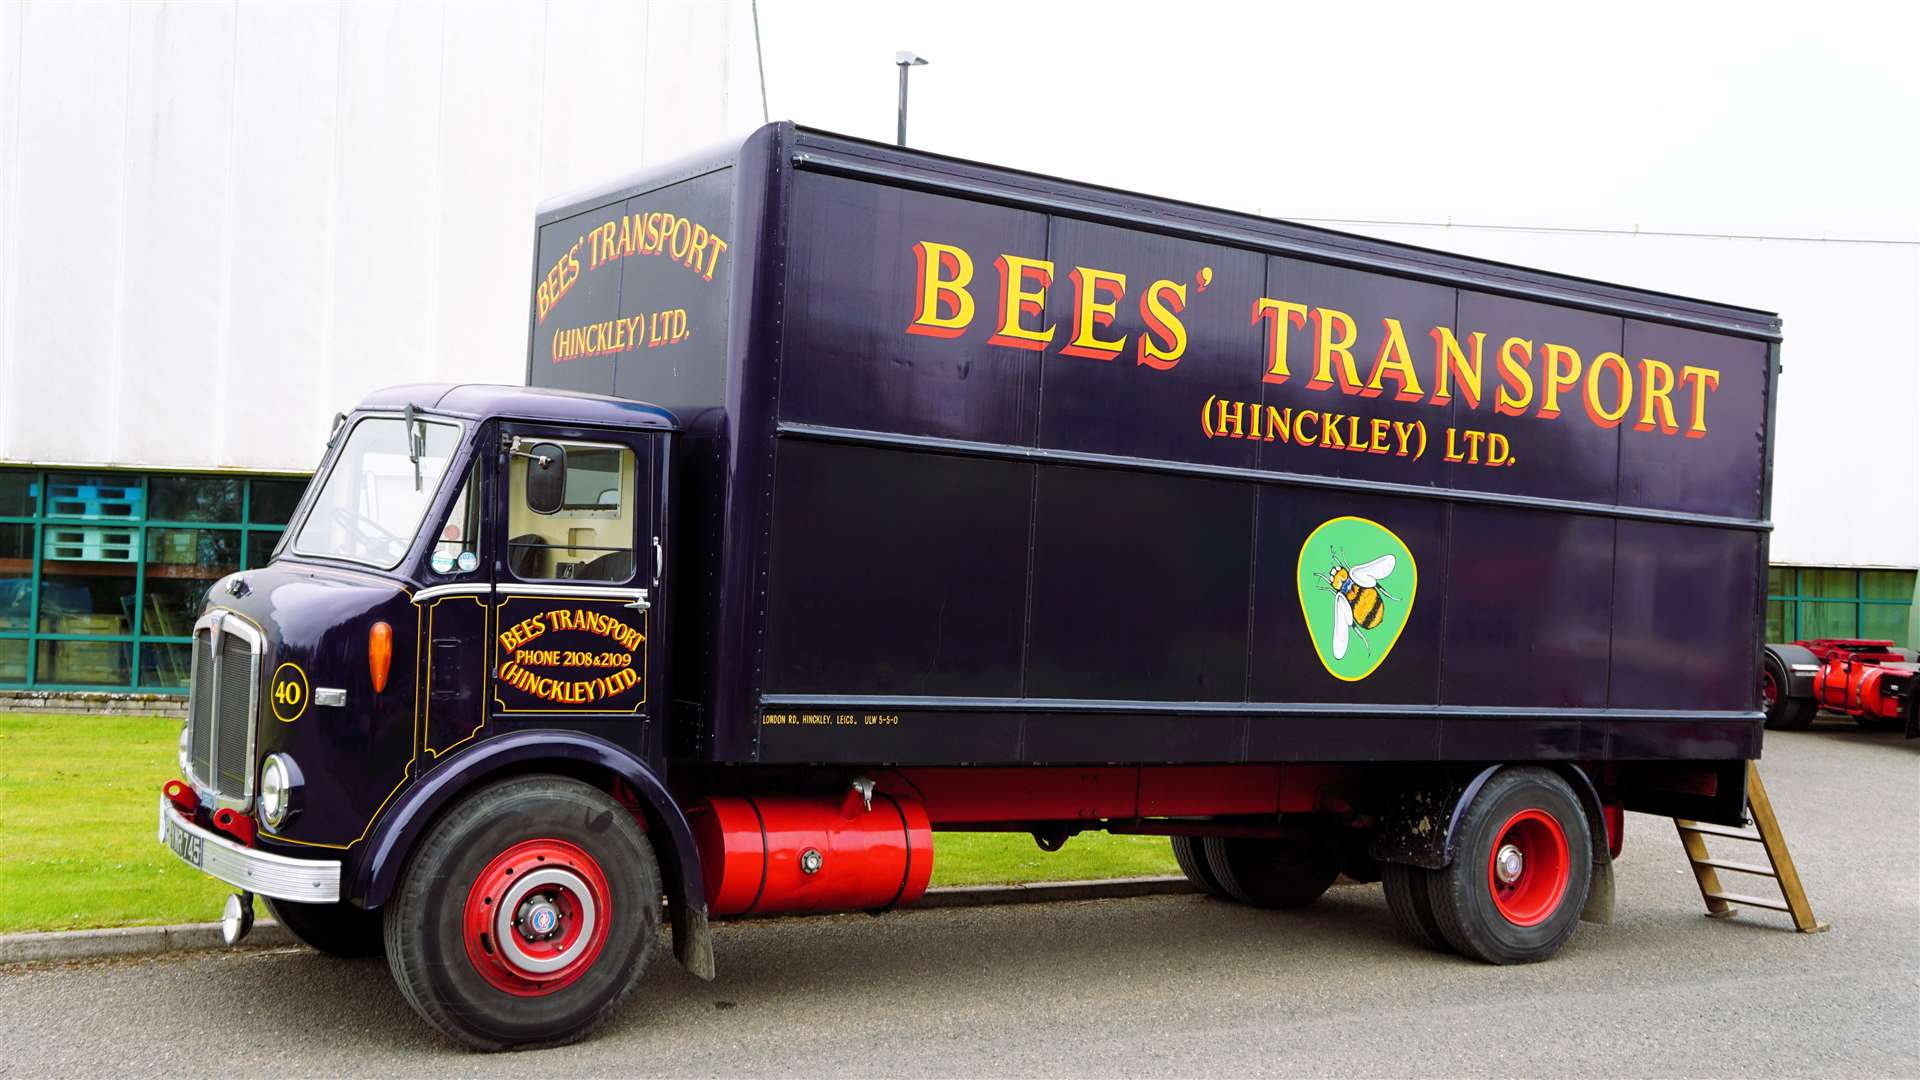 Bees' Transport was a Hinckley haulage firm that was founded by E.E. Bee in 1919. Picture: DGS